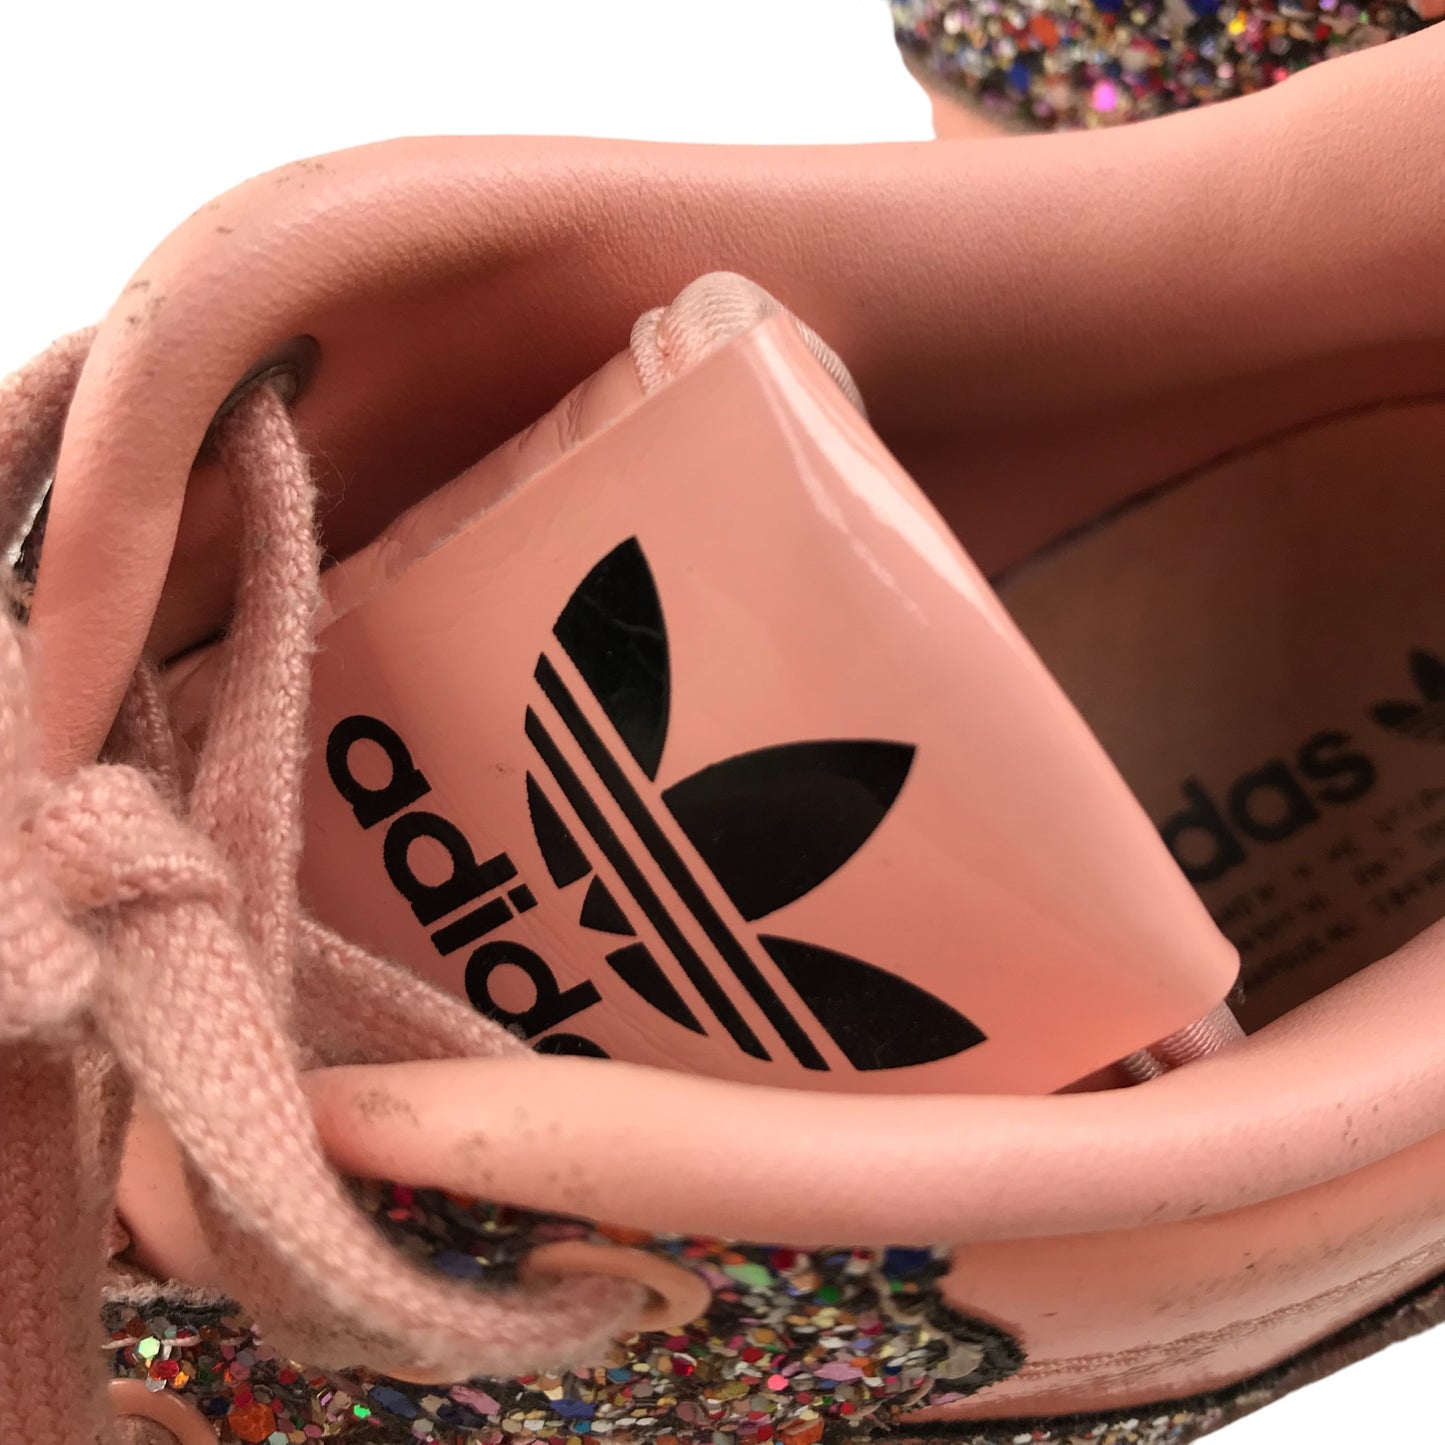 Adidas Trainers Shoe Size 4.5 Pink Glittery Sneakers with Laces